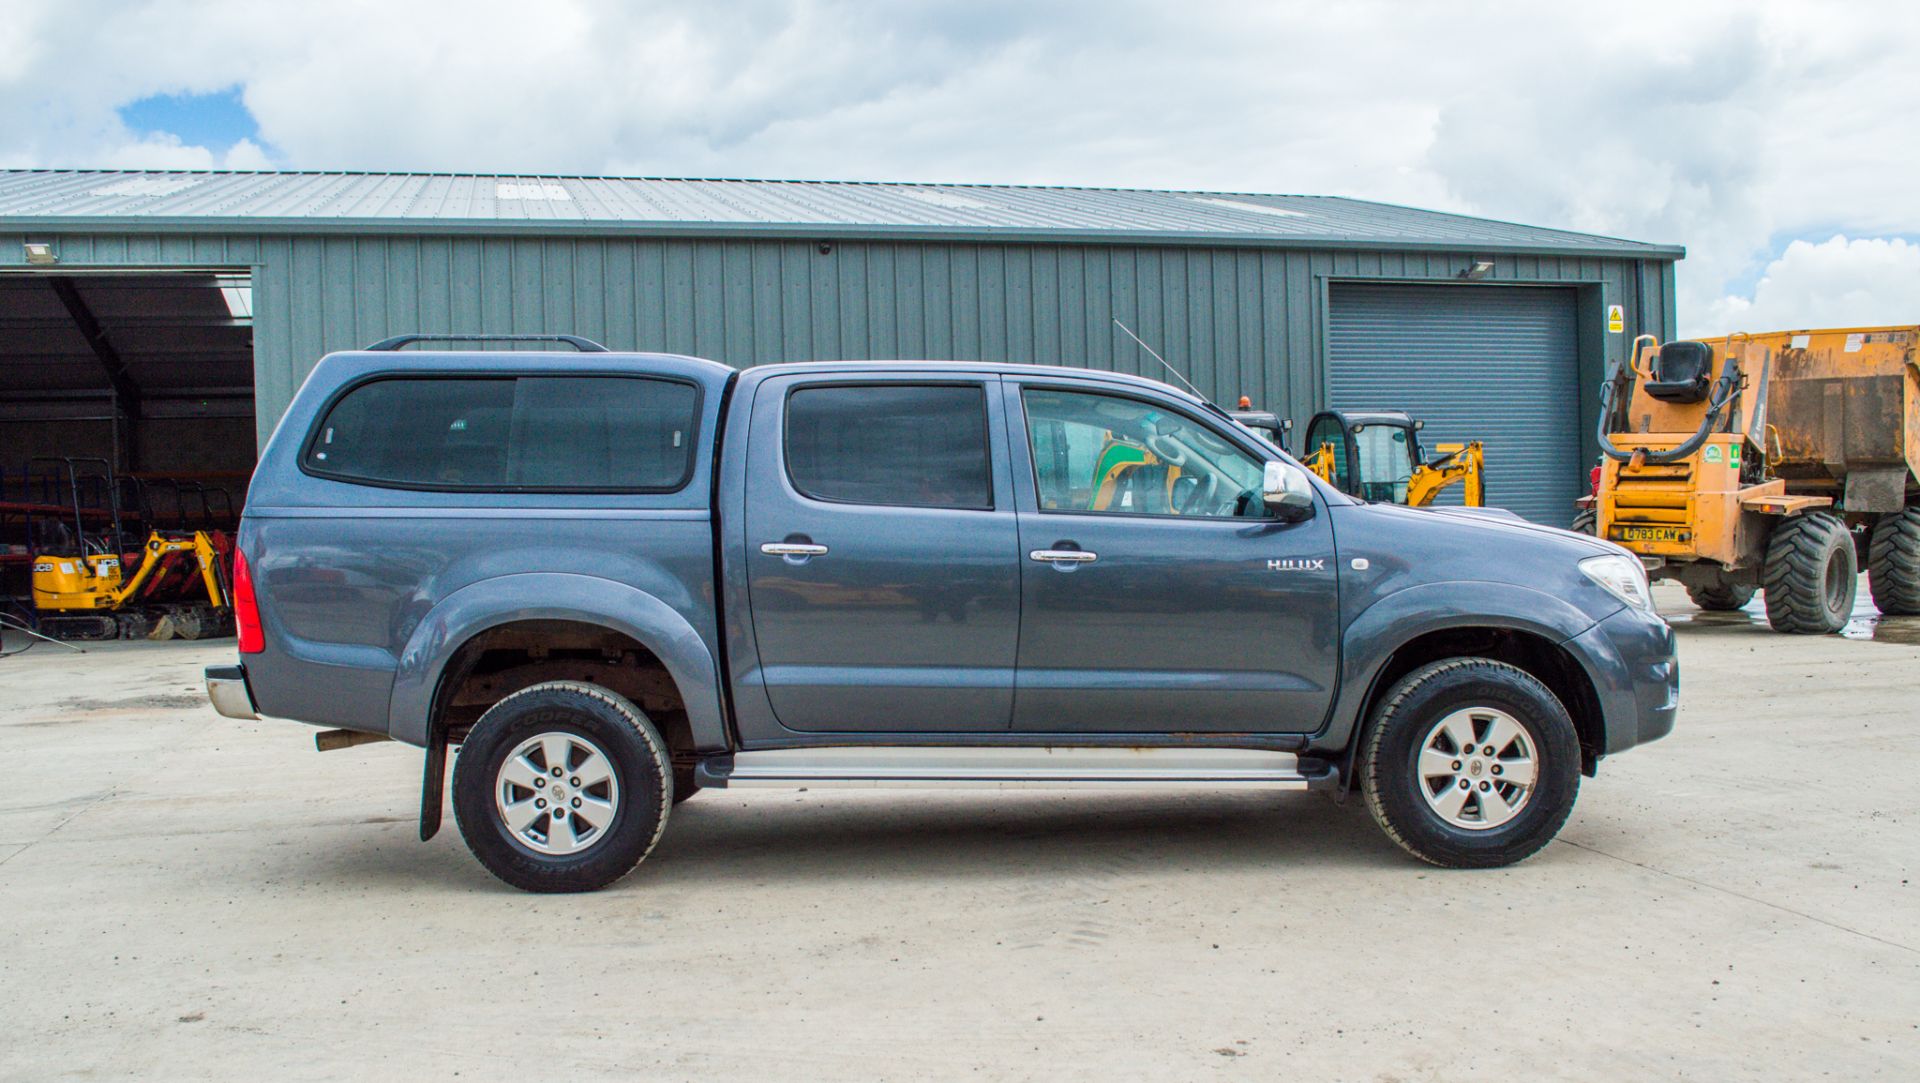 Toyota Hilux 2.5 D-4D 144 HL3 4wd manual double cab pick up Reg No: ST10 AOW Date of Registration: - Image 8 of 25